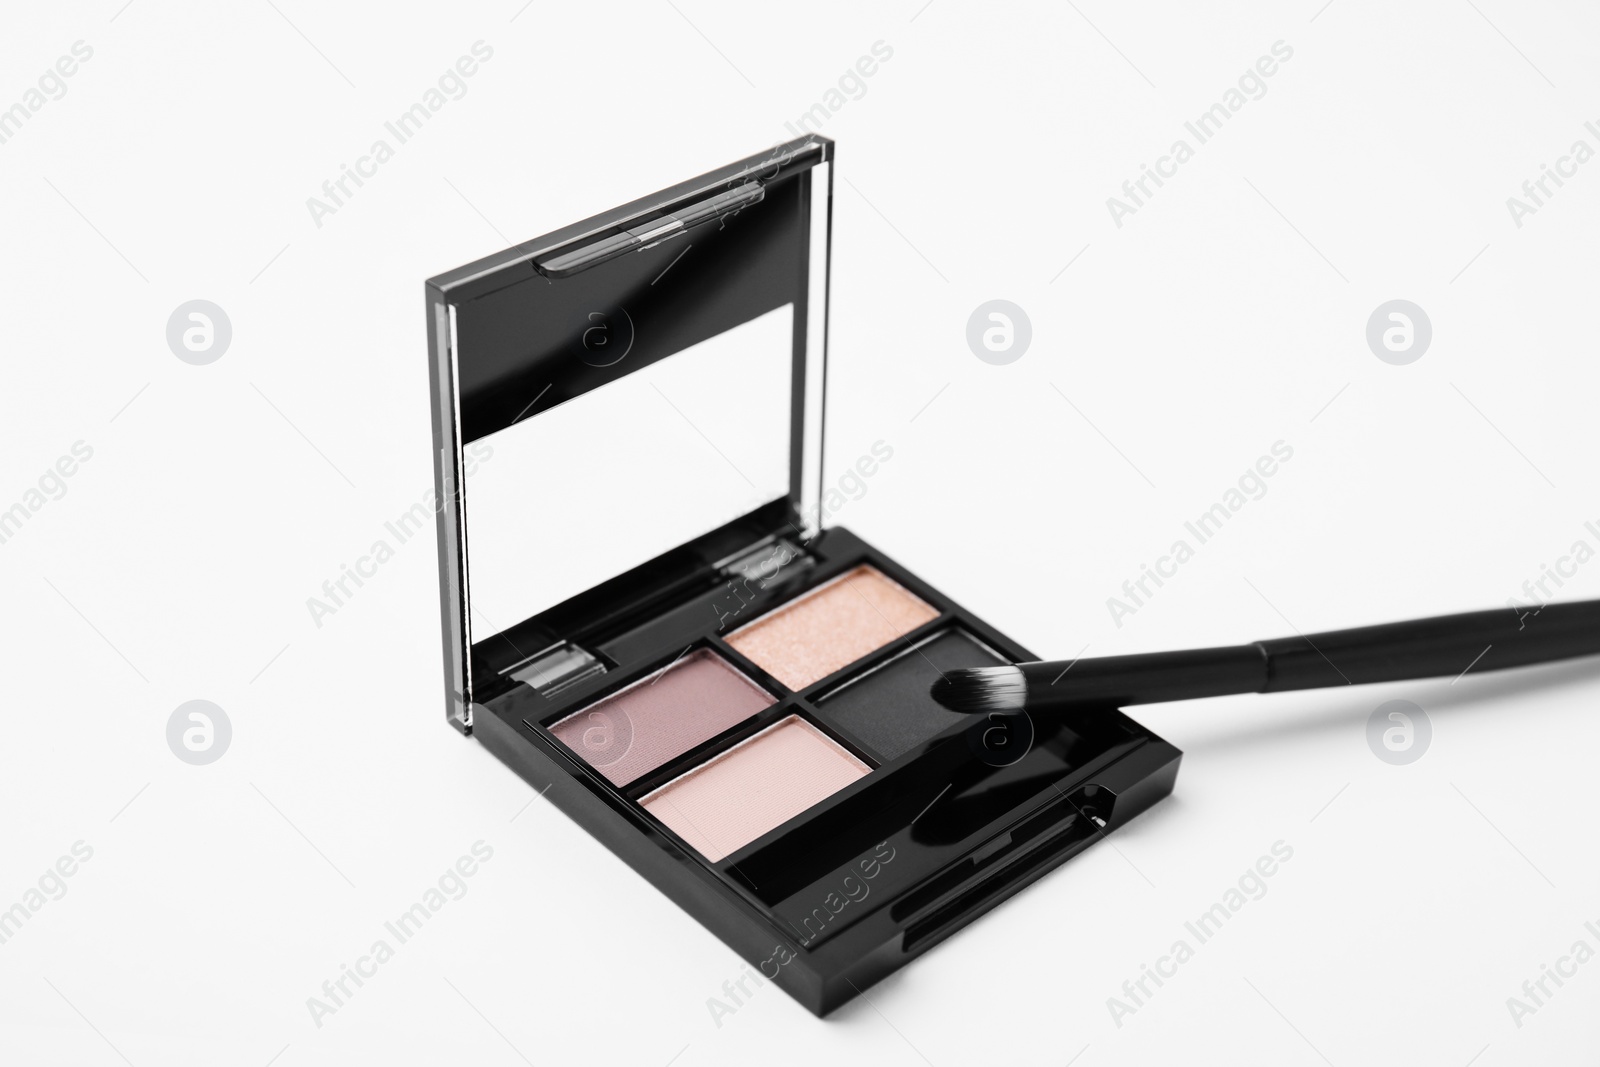 Photo of Eye shadow palette and professional makeup brush on white background